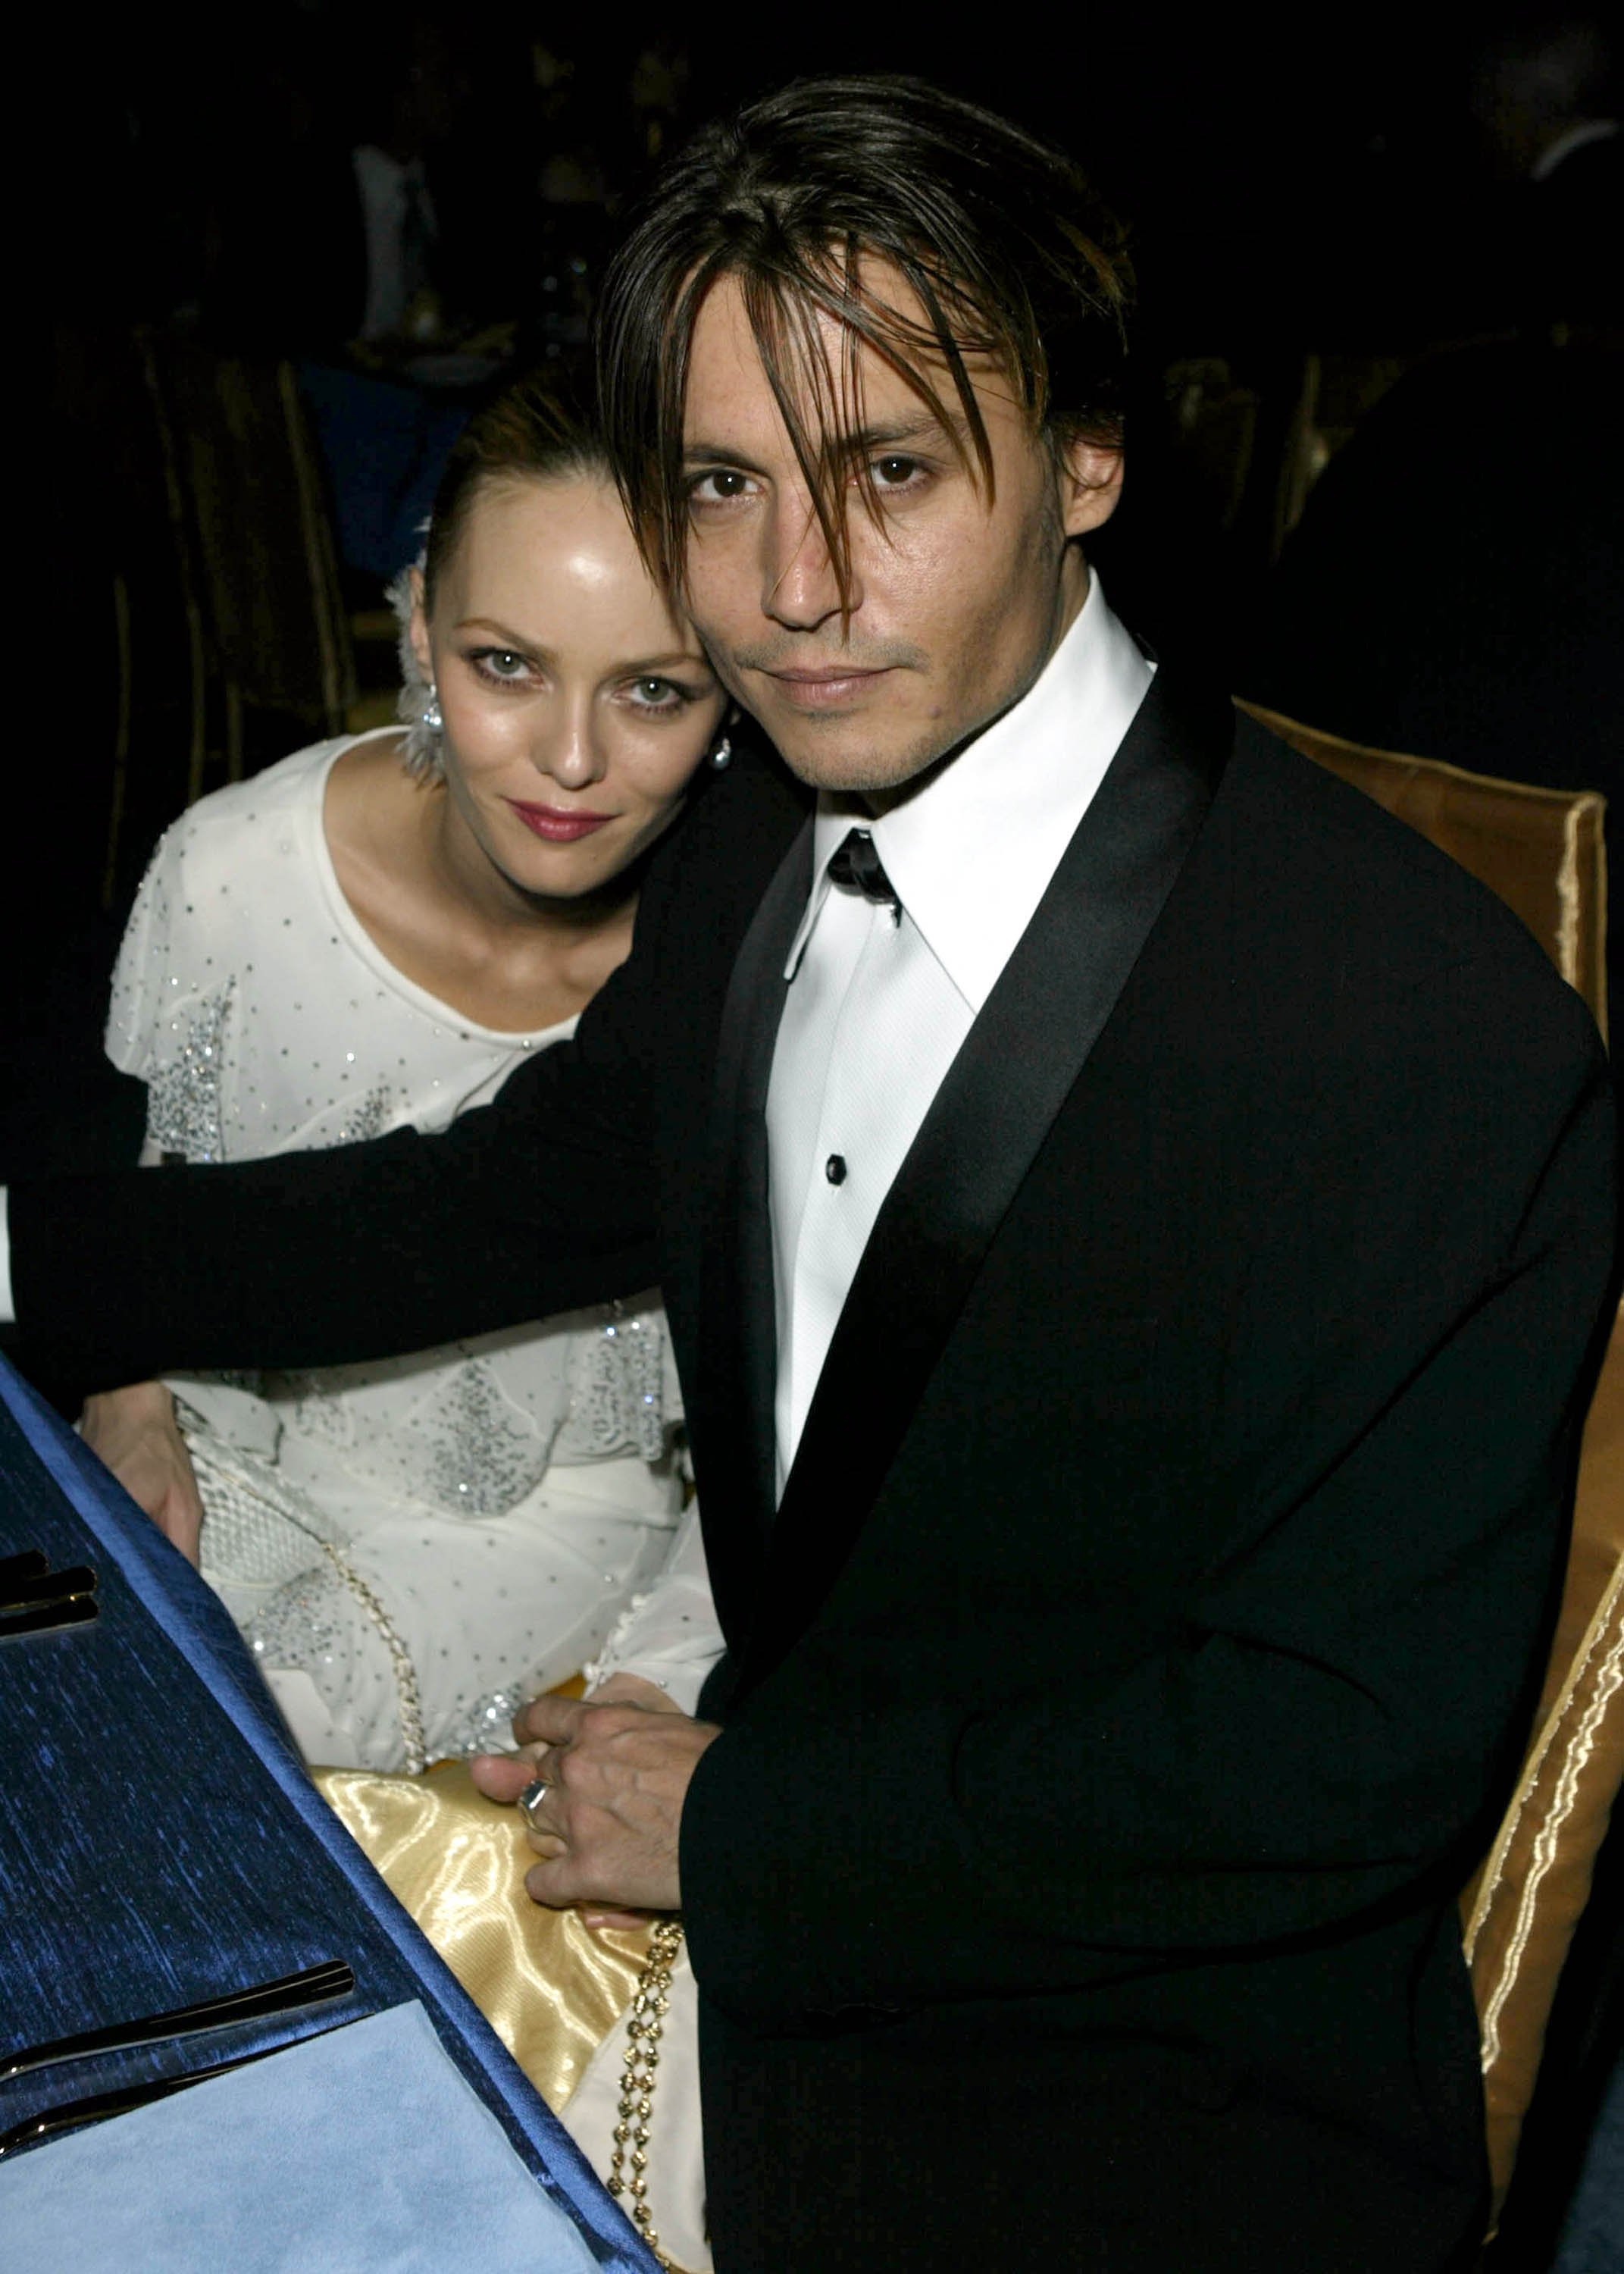 Actress Vanessa Paradis and Johnny Depp at the The Kodak Theater in Hollywood, California. / Source: Getty Images